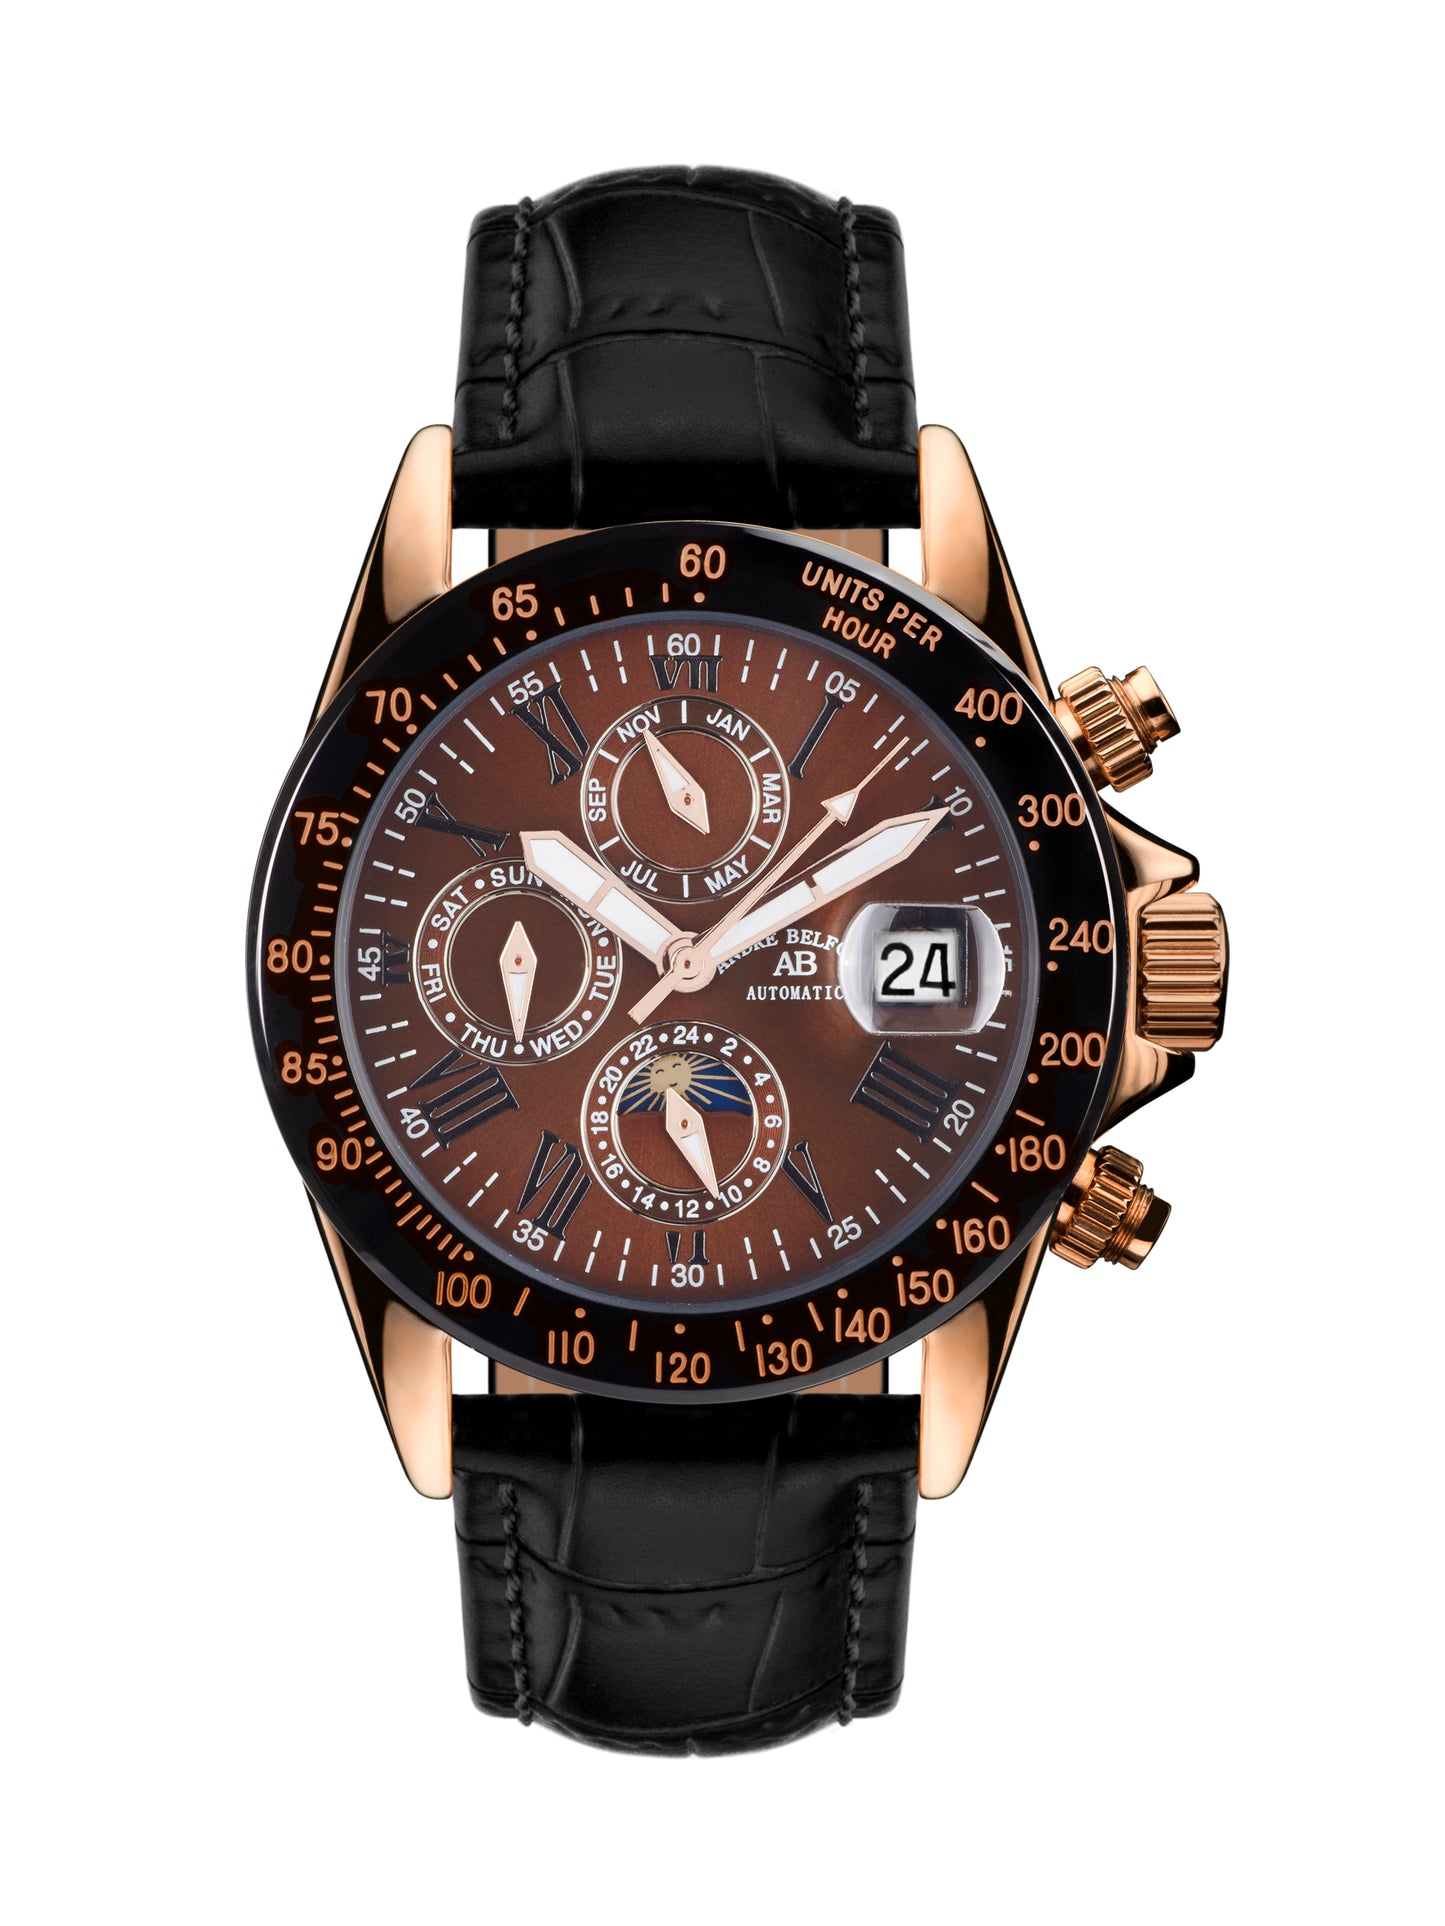 Automatic watches — Le Capitaine — André Belfort — rosegold bronze leather